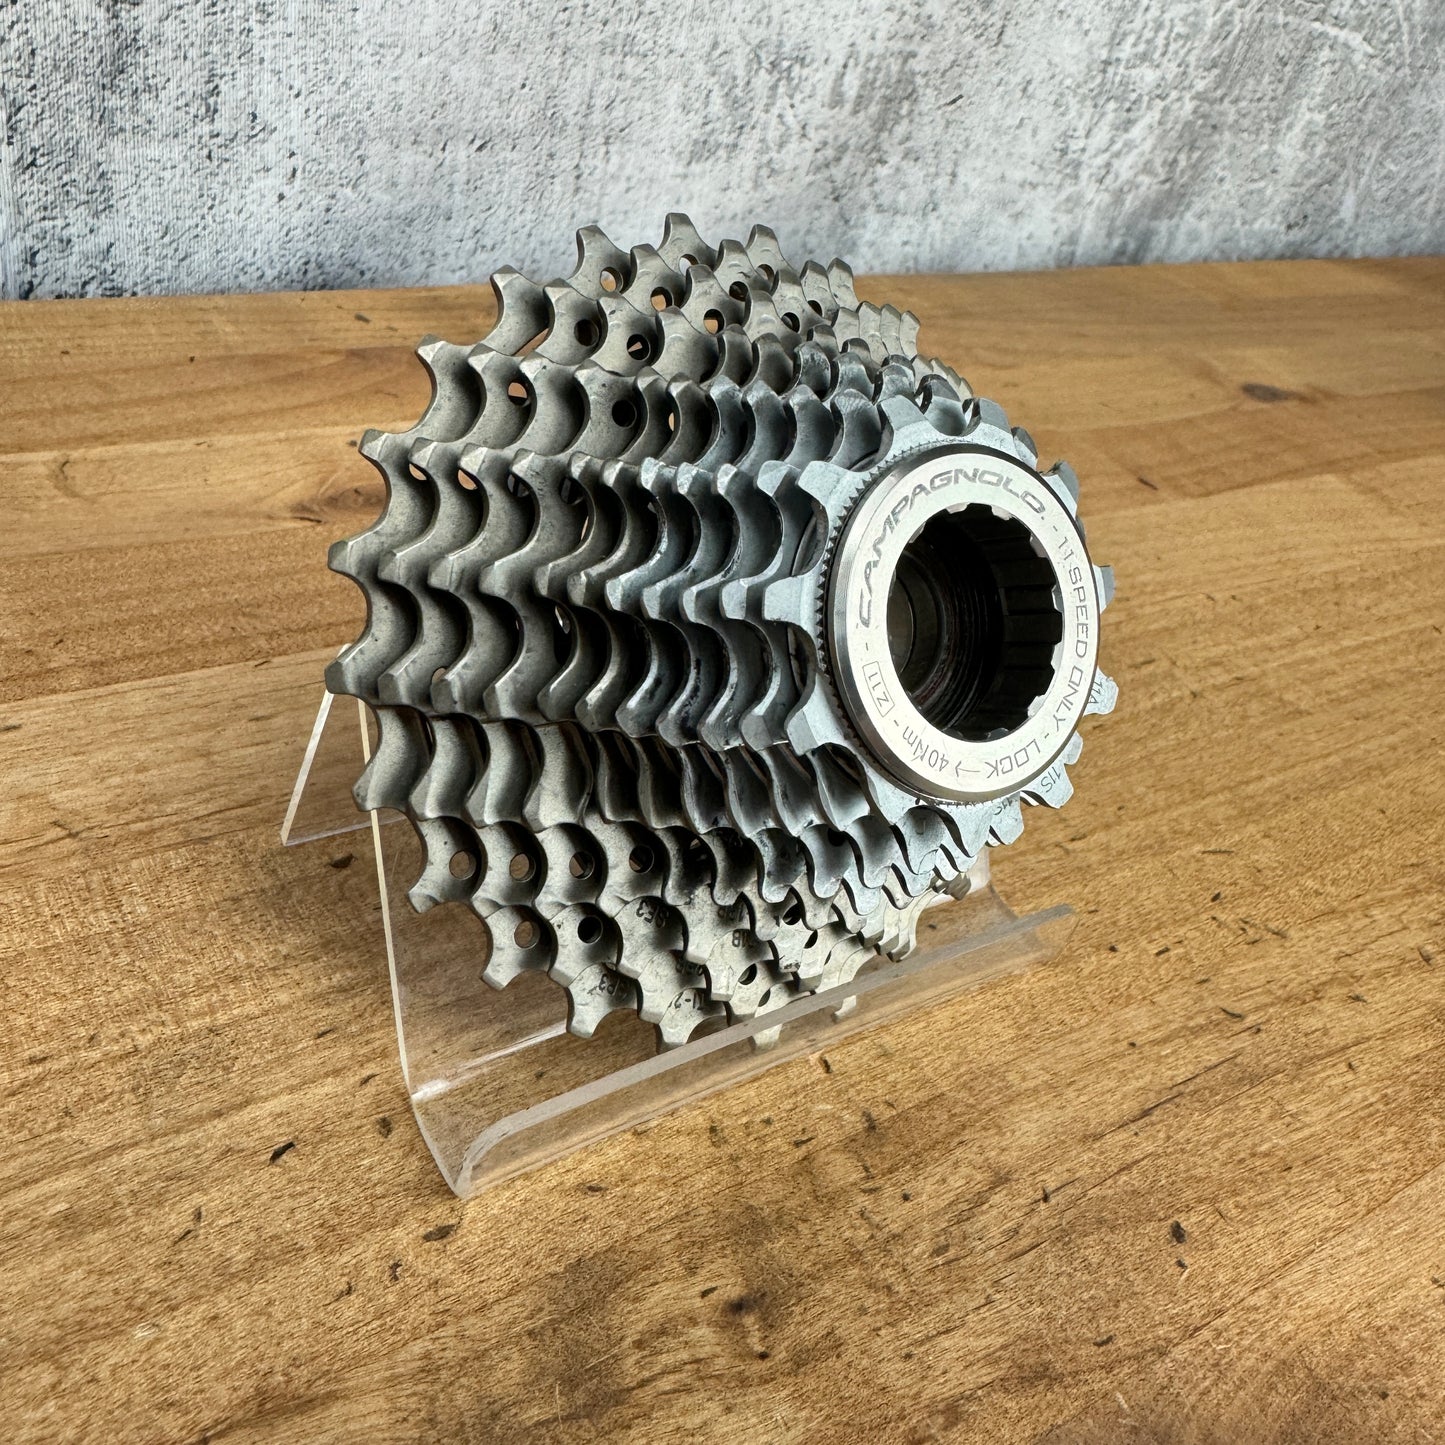 Campagnolo Super Record 11 11-25t 11-Speed Bike Cassette "Typical Wear" 195g